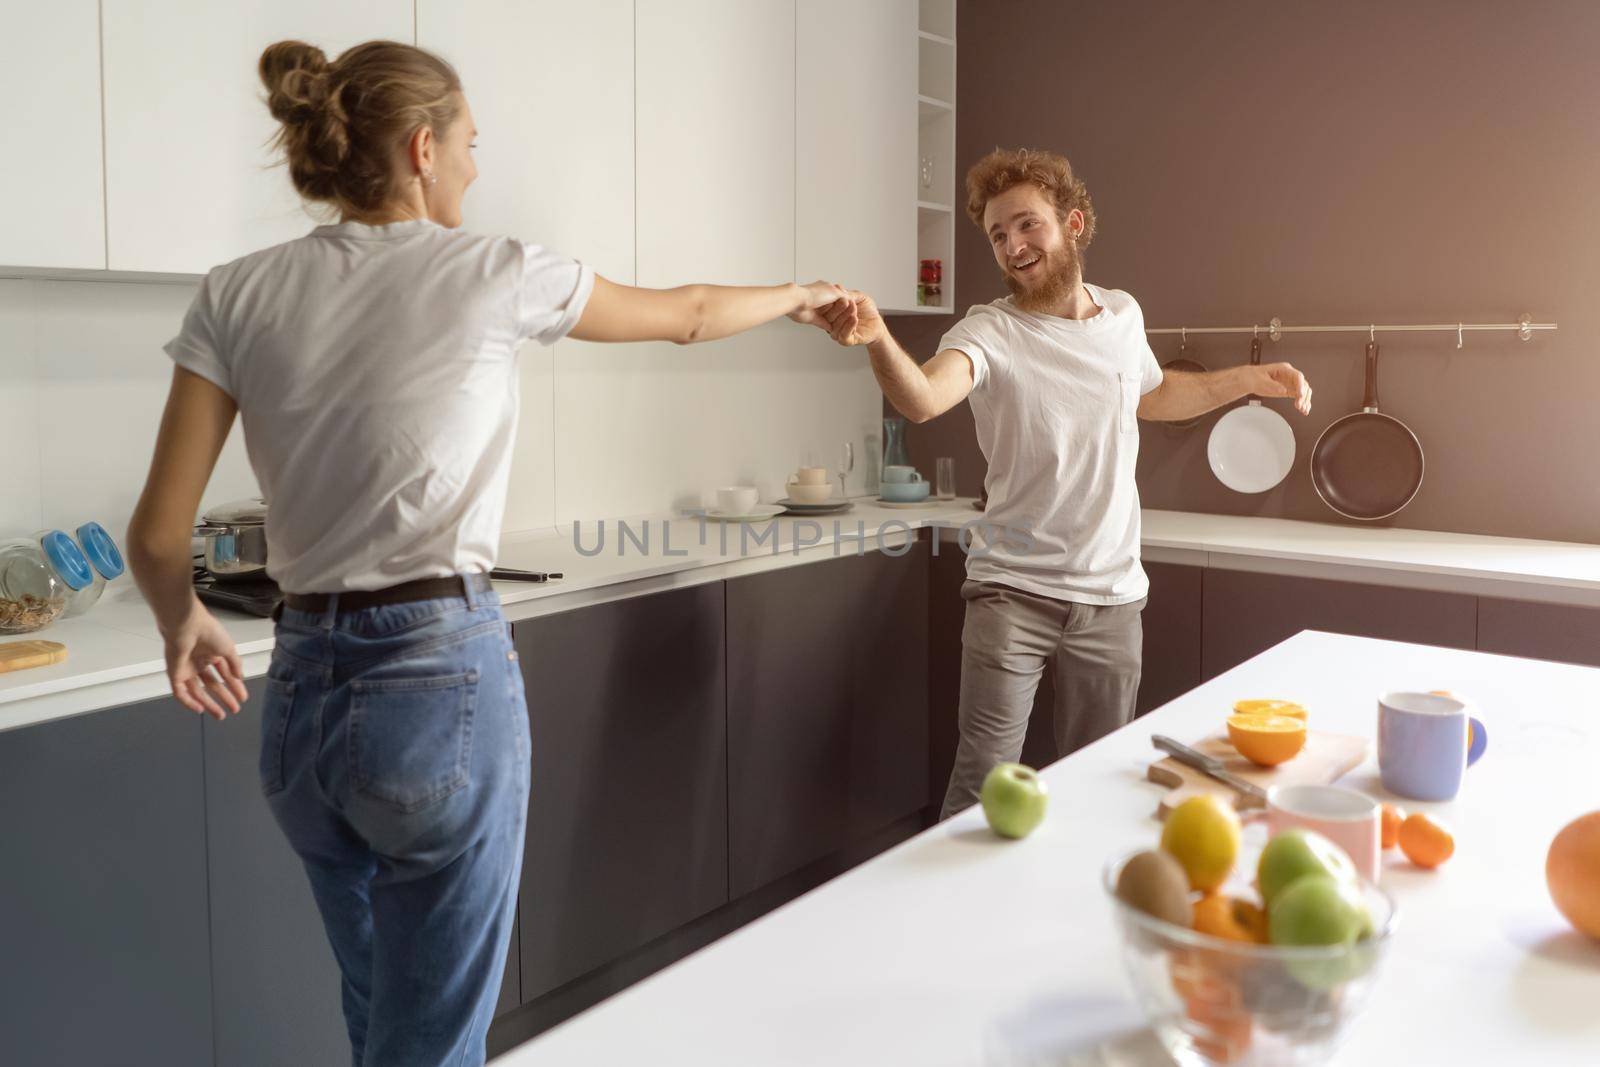 Waltzing in a new home young couple dancing celebrating their new purchase of buying their own house. Happy new family at kitchen wearing casual clothes. Love, family, happiness concept by LipikStockMedia